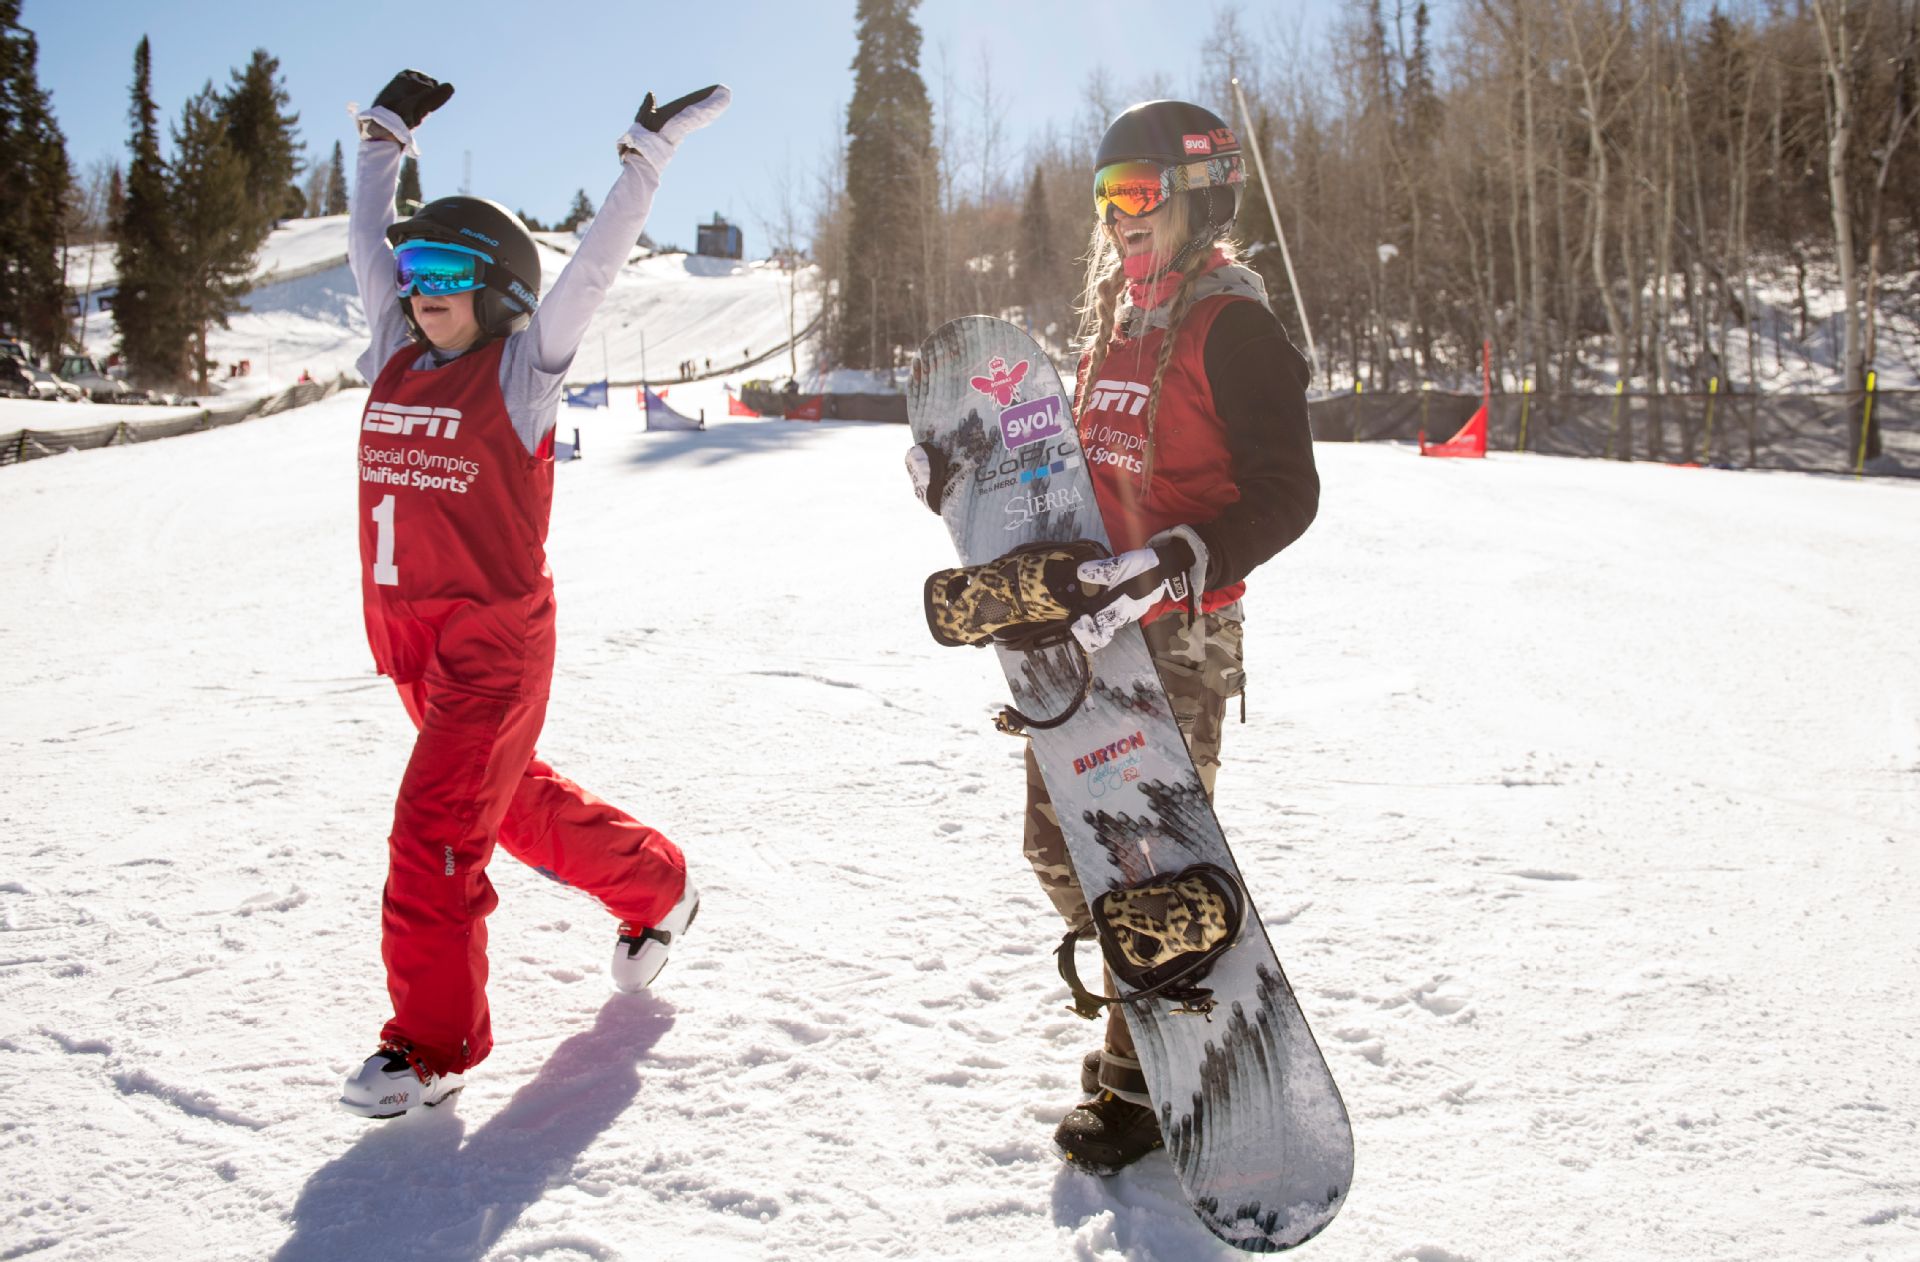 Hannah Teeter at X-Games Bringing People From Different Backgrounds Together